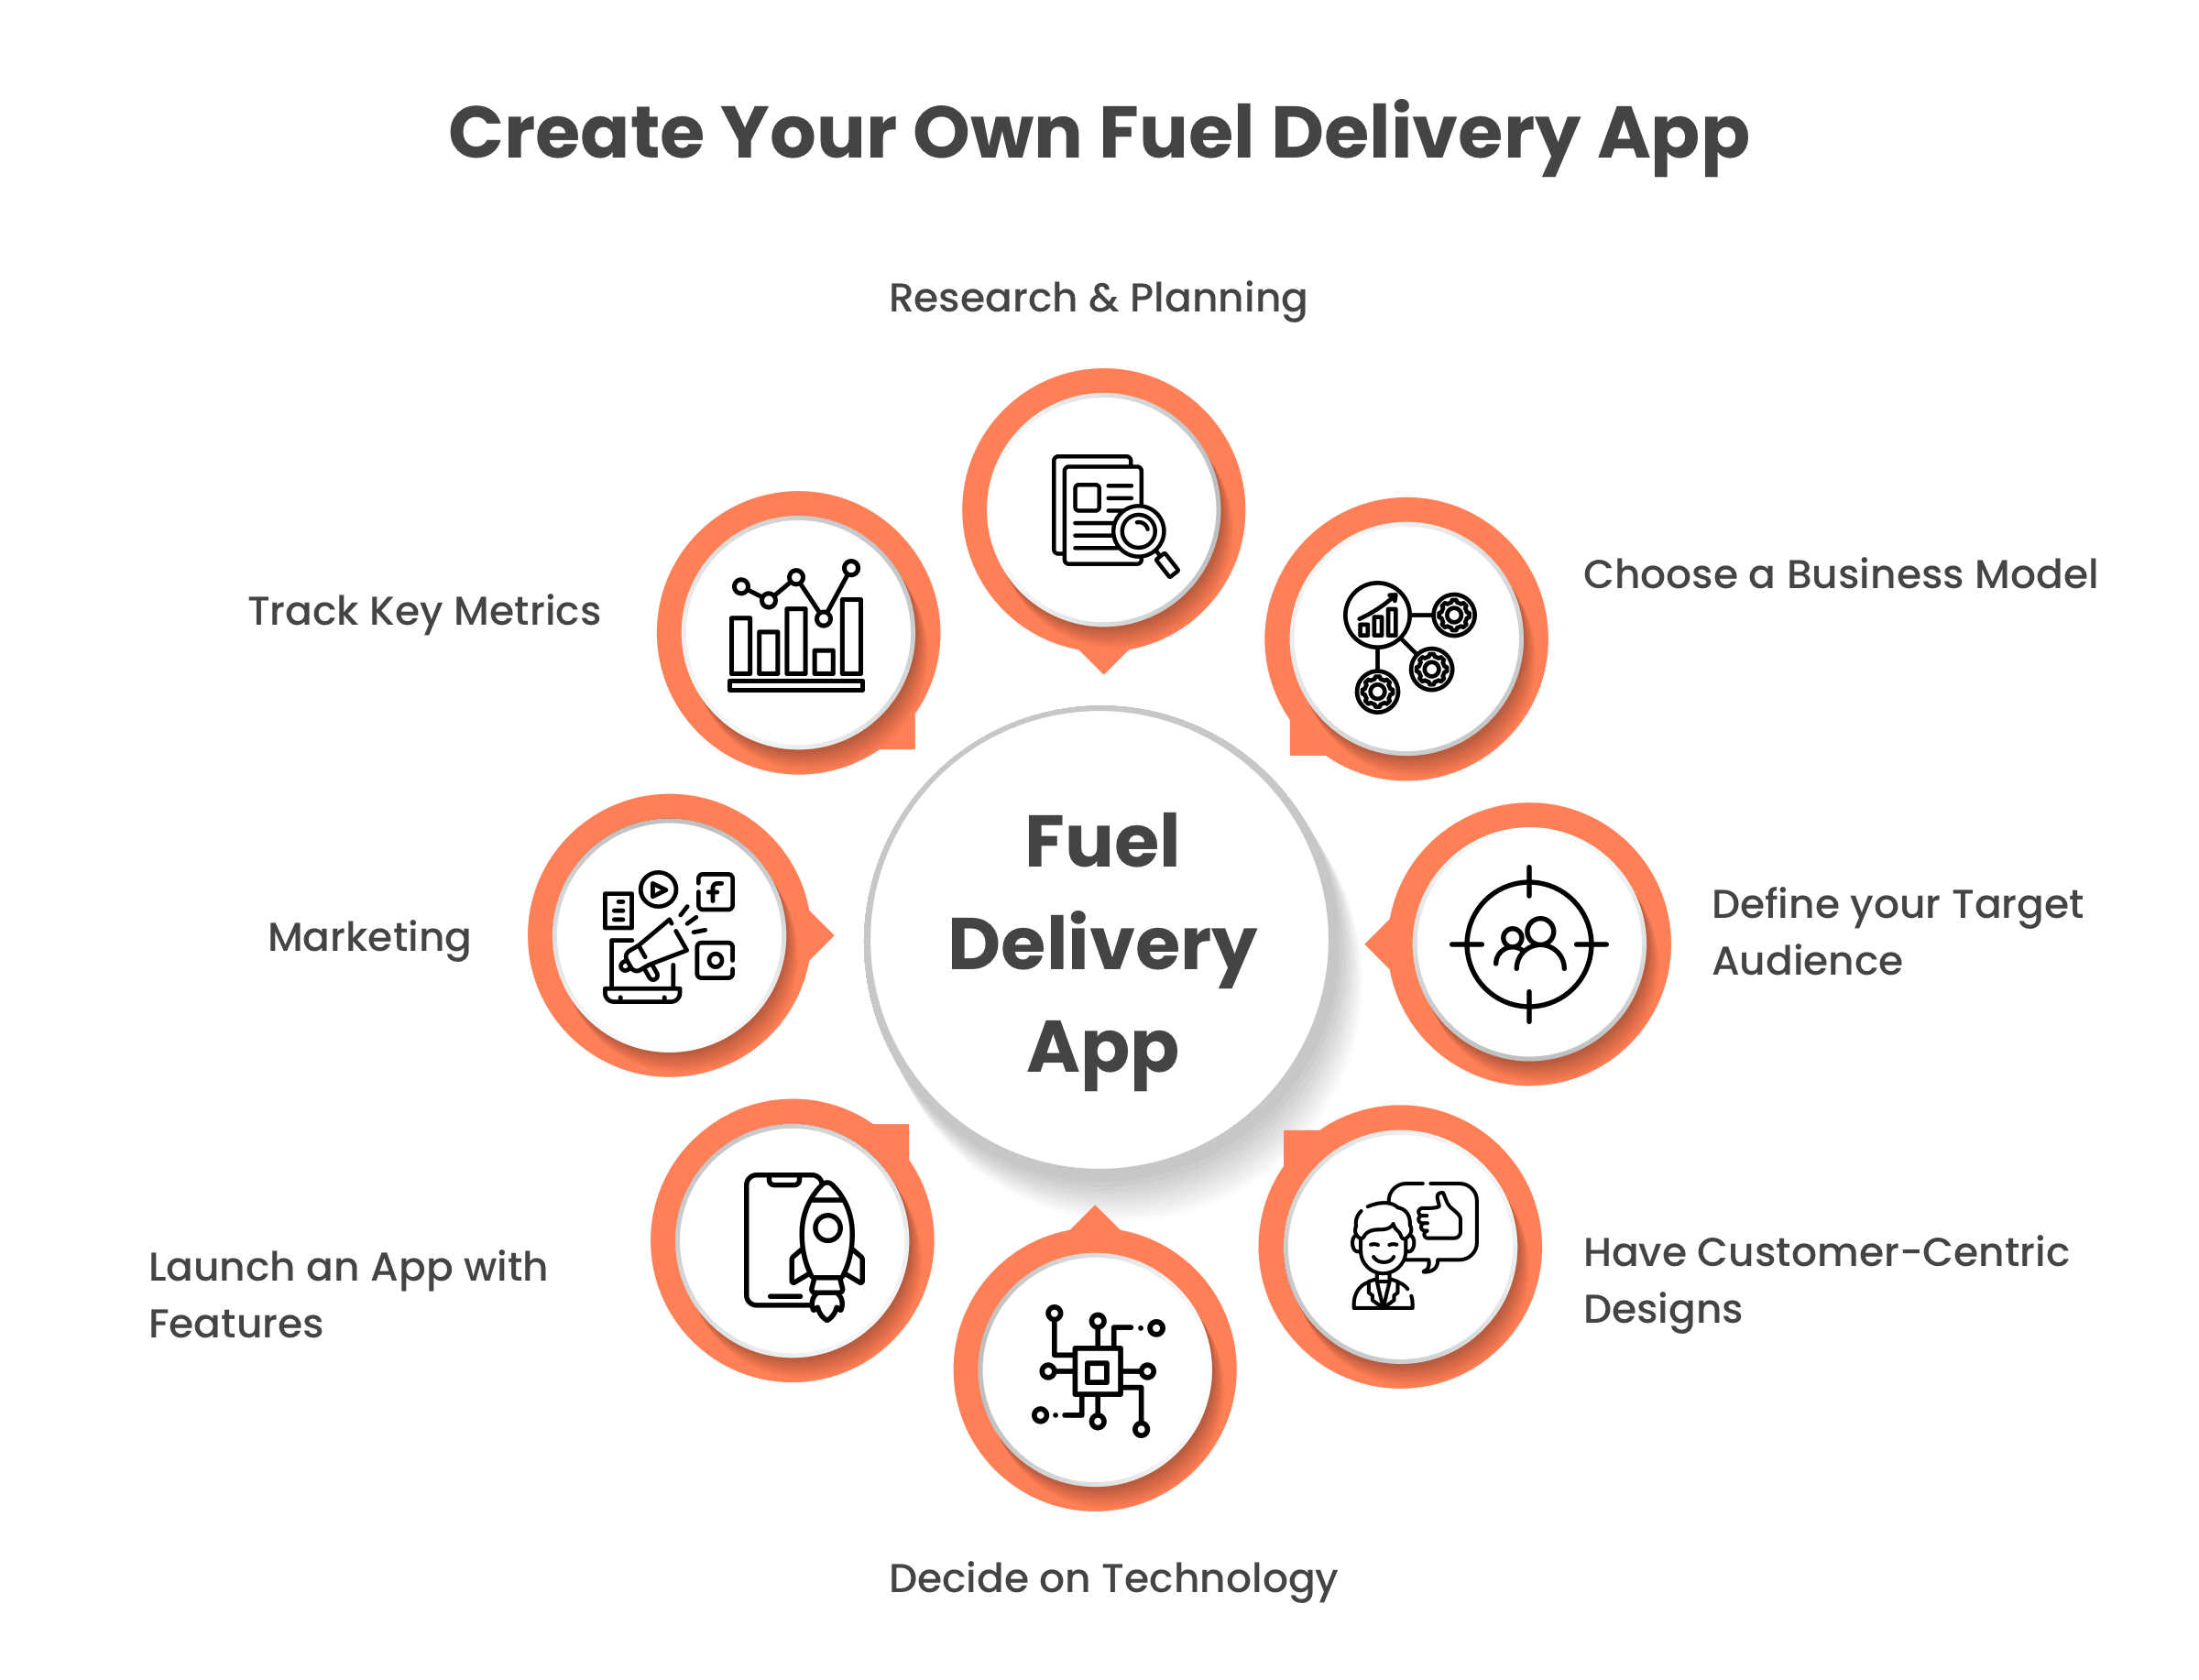 Create Your Own Fuel Delivery App